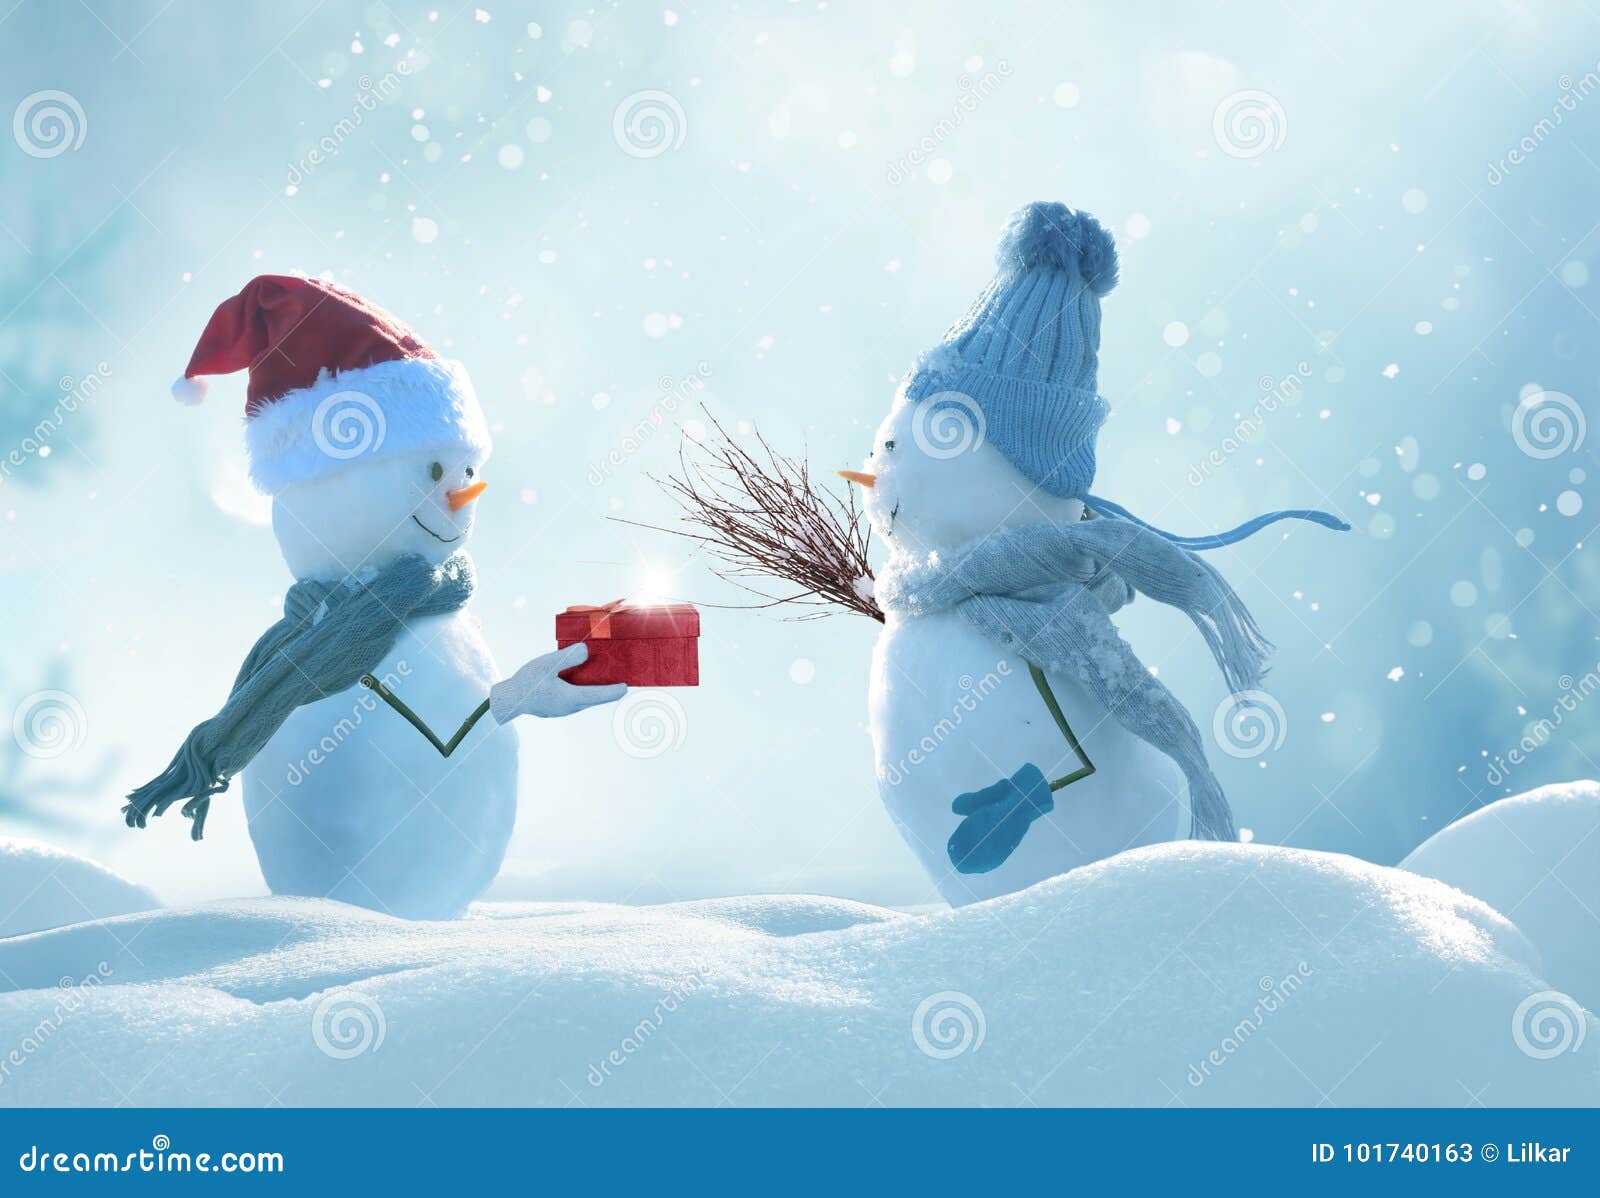 two cheerful snowmen standing in winter christmas landscape.